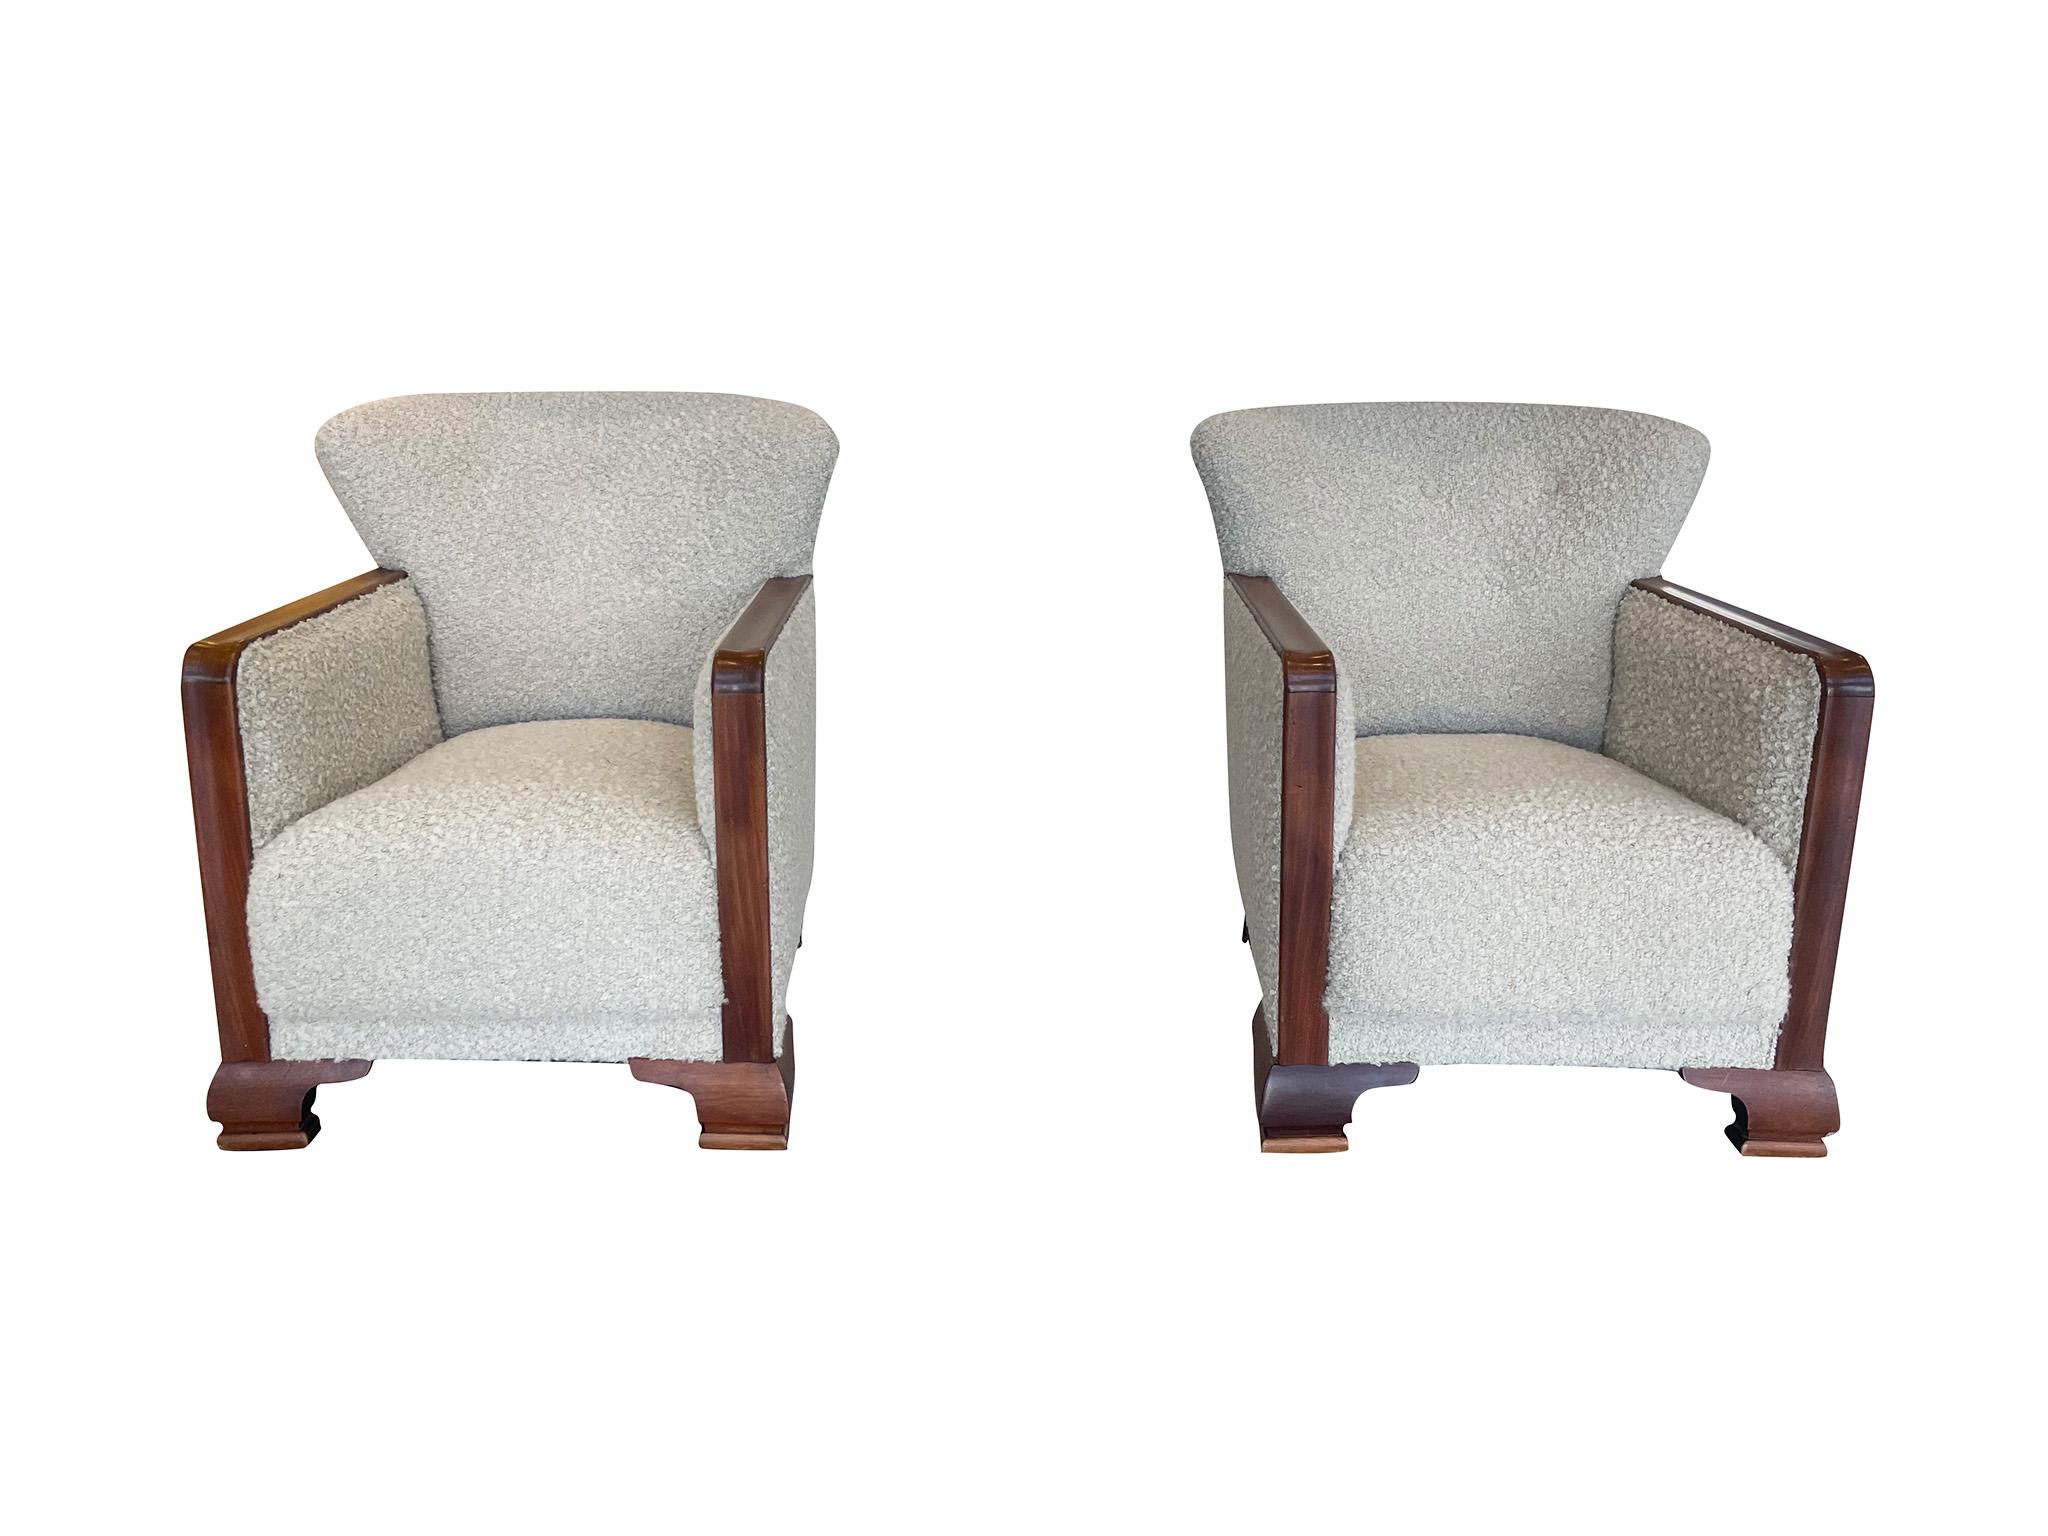 Pair of 1950s Danish Art Deco Club Chairs After Fritz Hansen in Oyster Bouclé In Good Condition For Sale In New York, NY